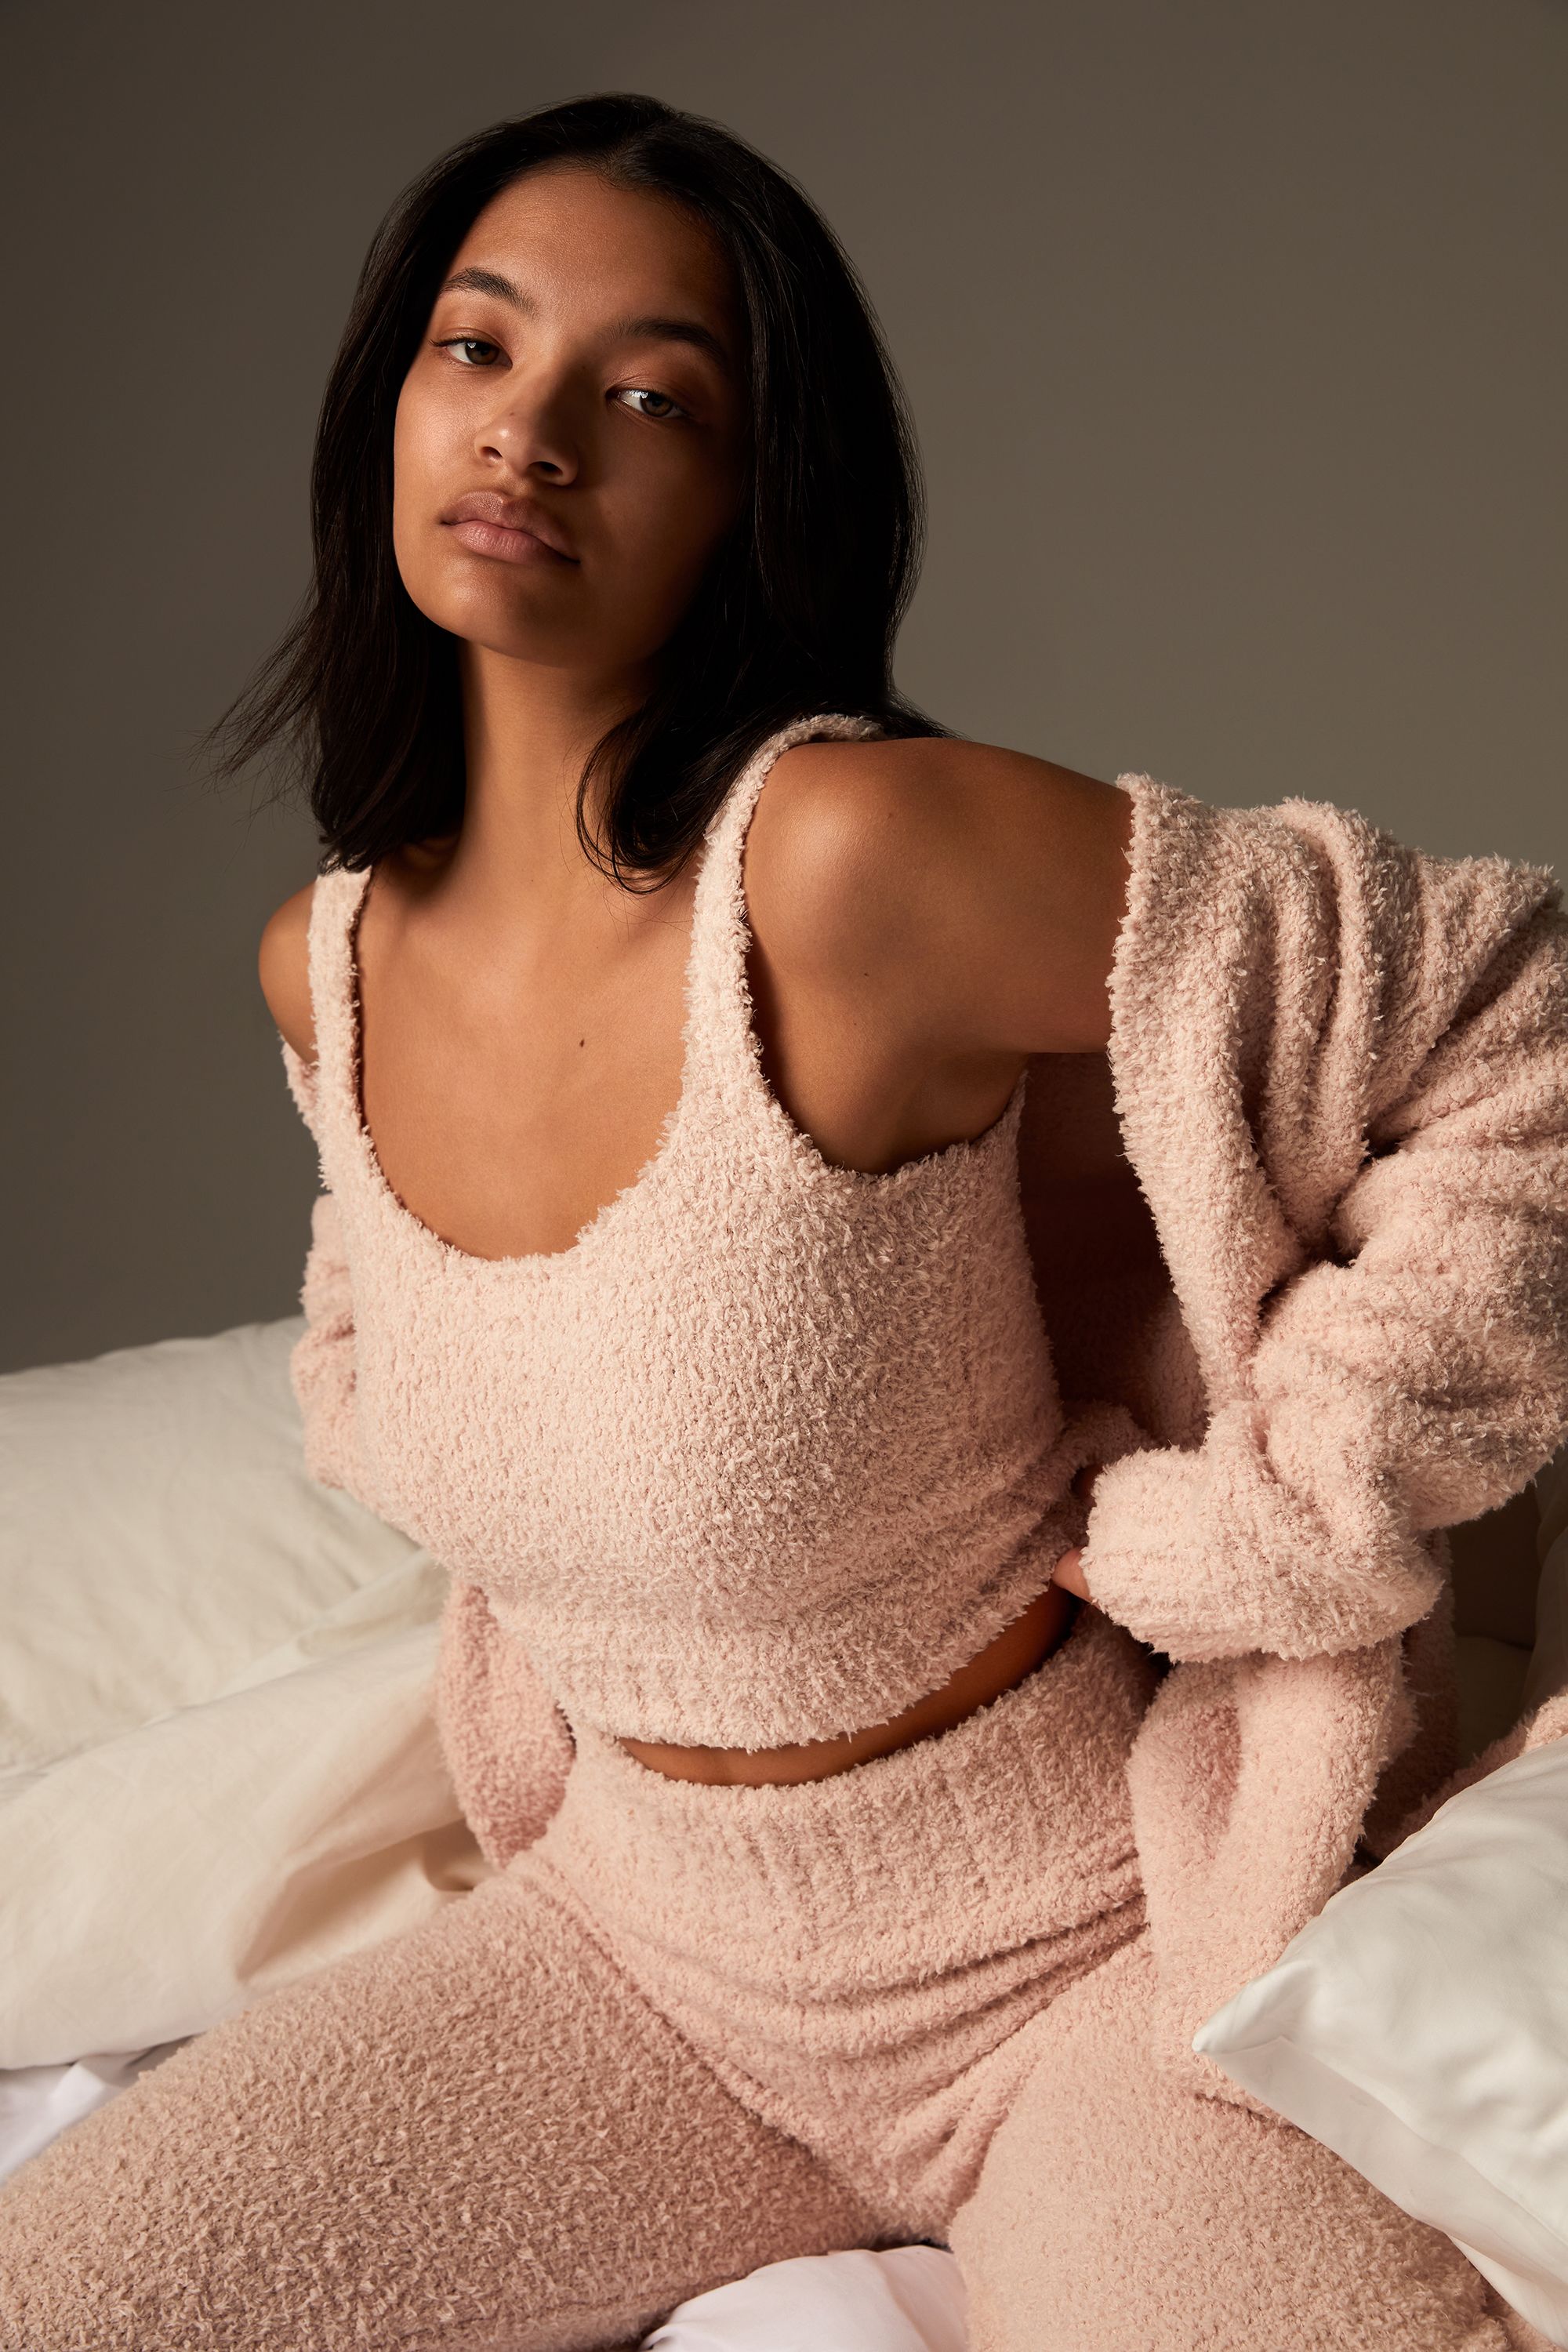 The New SKIMS Cozy Collection and More Pieces in Stock from Kim